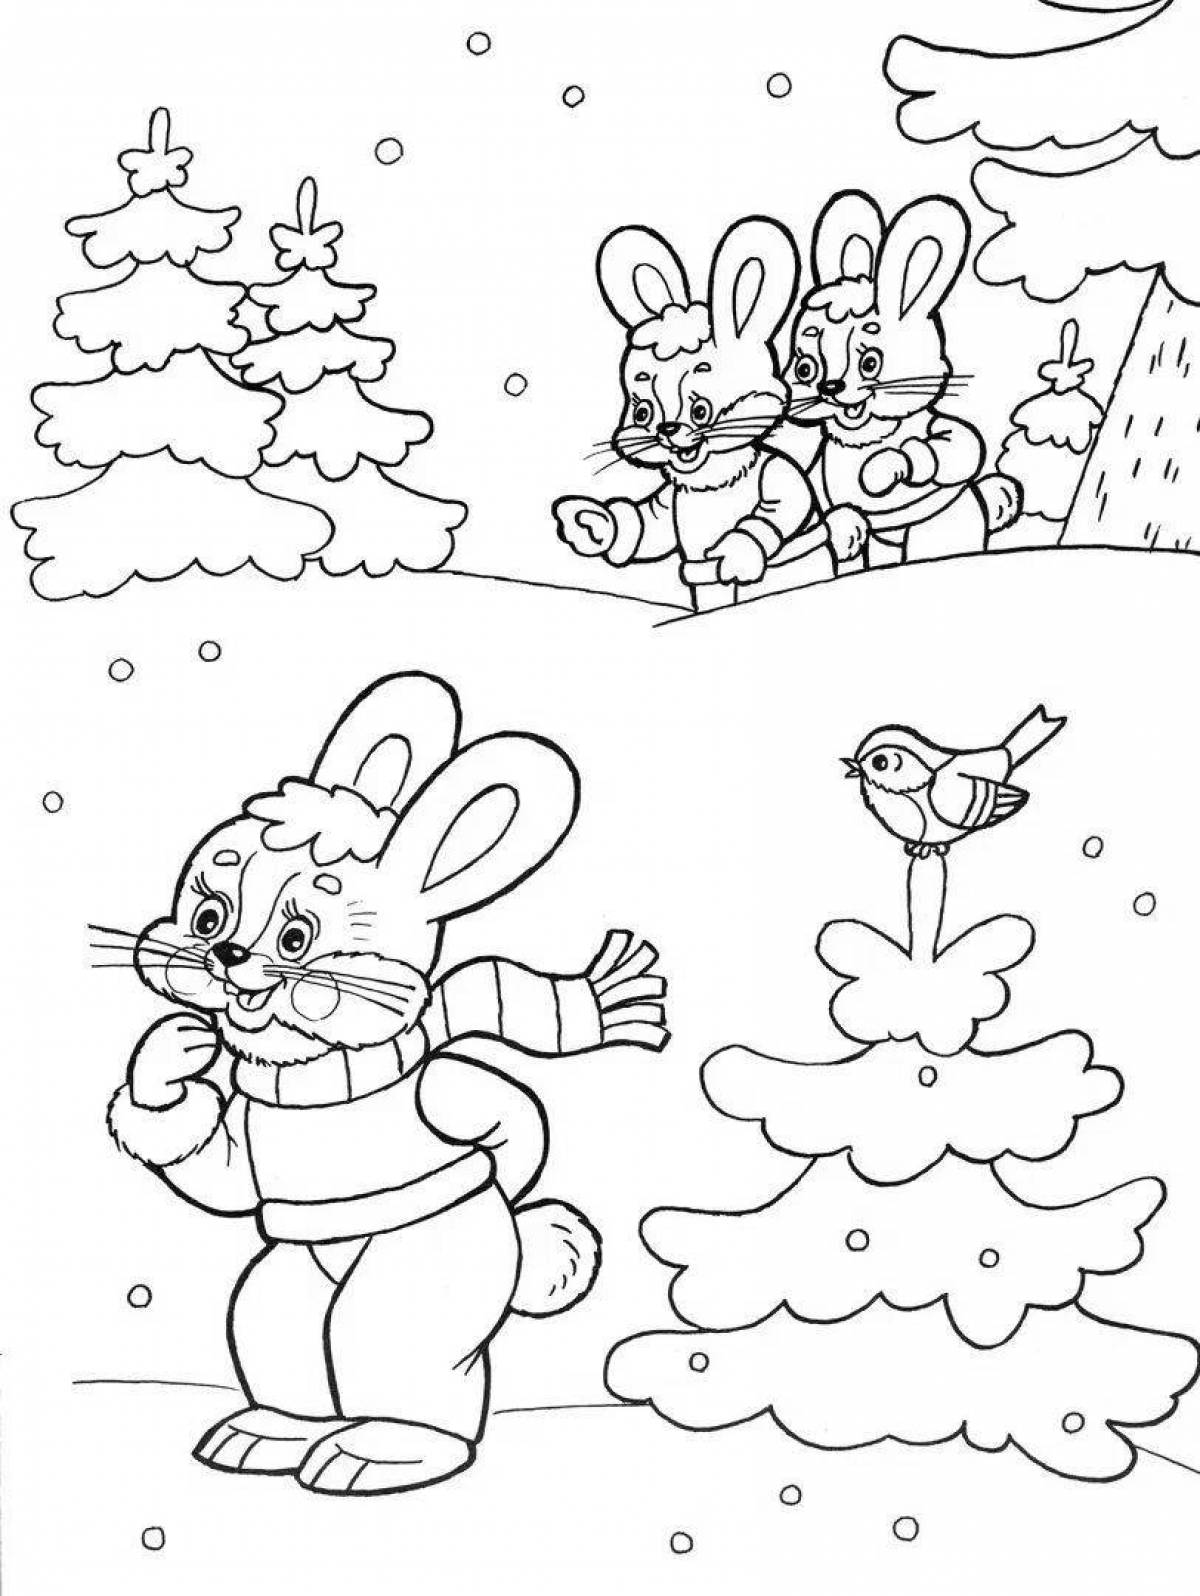 Crazy coloring rabbit new year